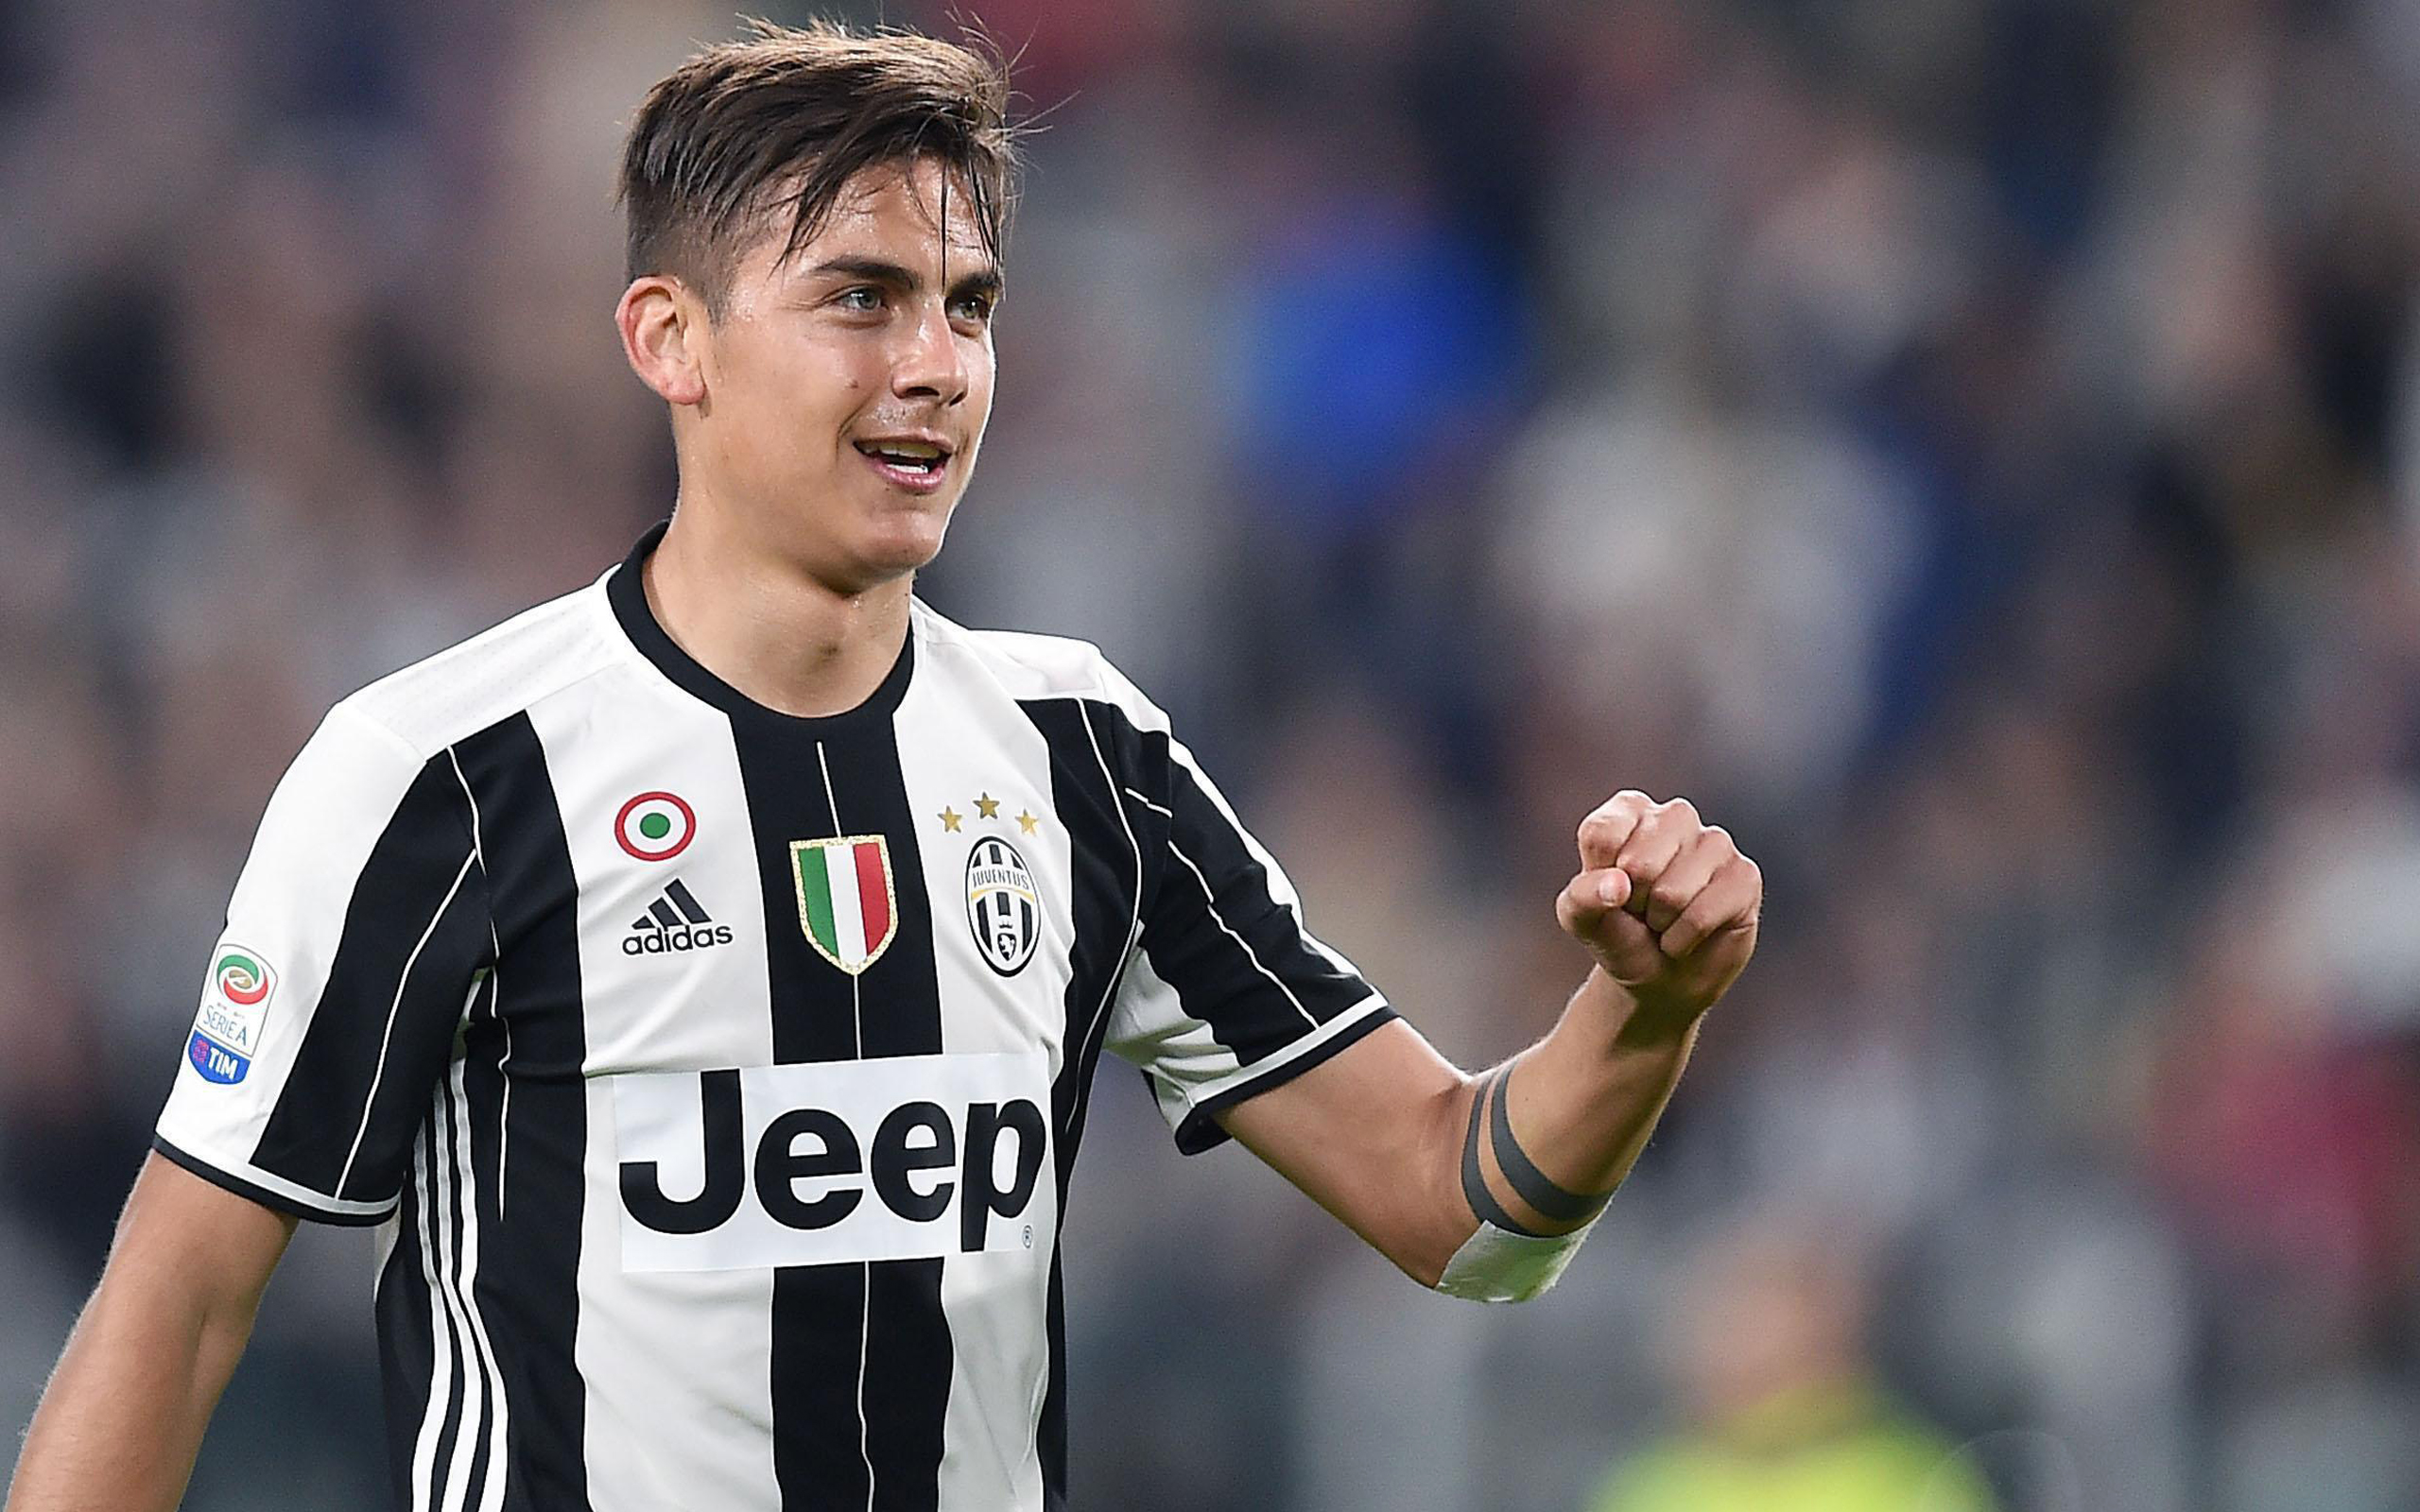 Juve, Paulo Dybala, Footballers, Juventus, Match, Italy, - Jeep , HD Wallpaper & Backgrounds